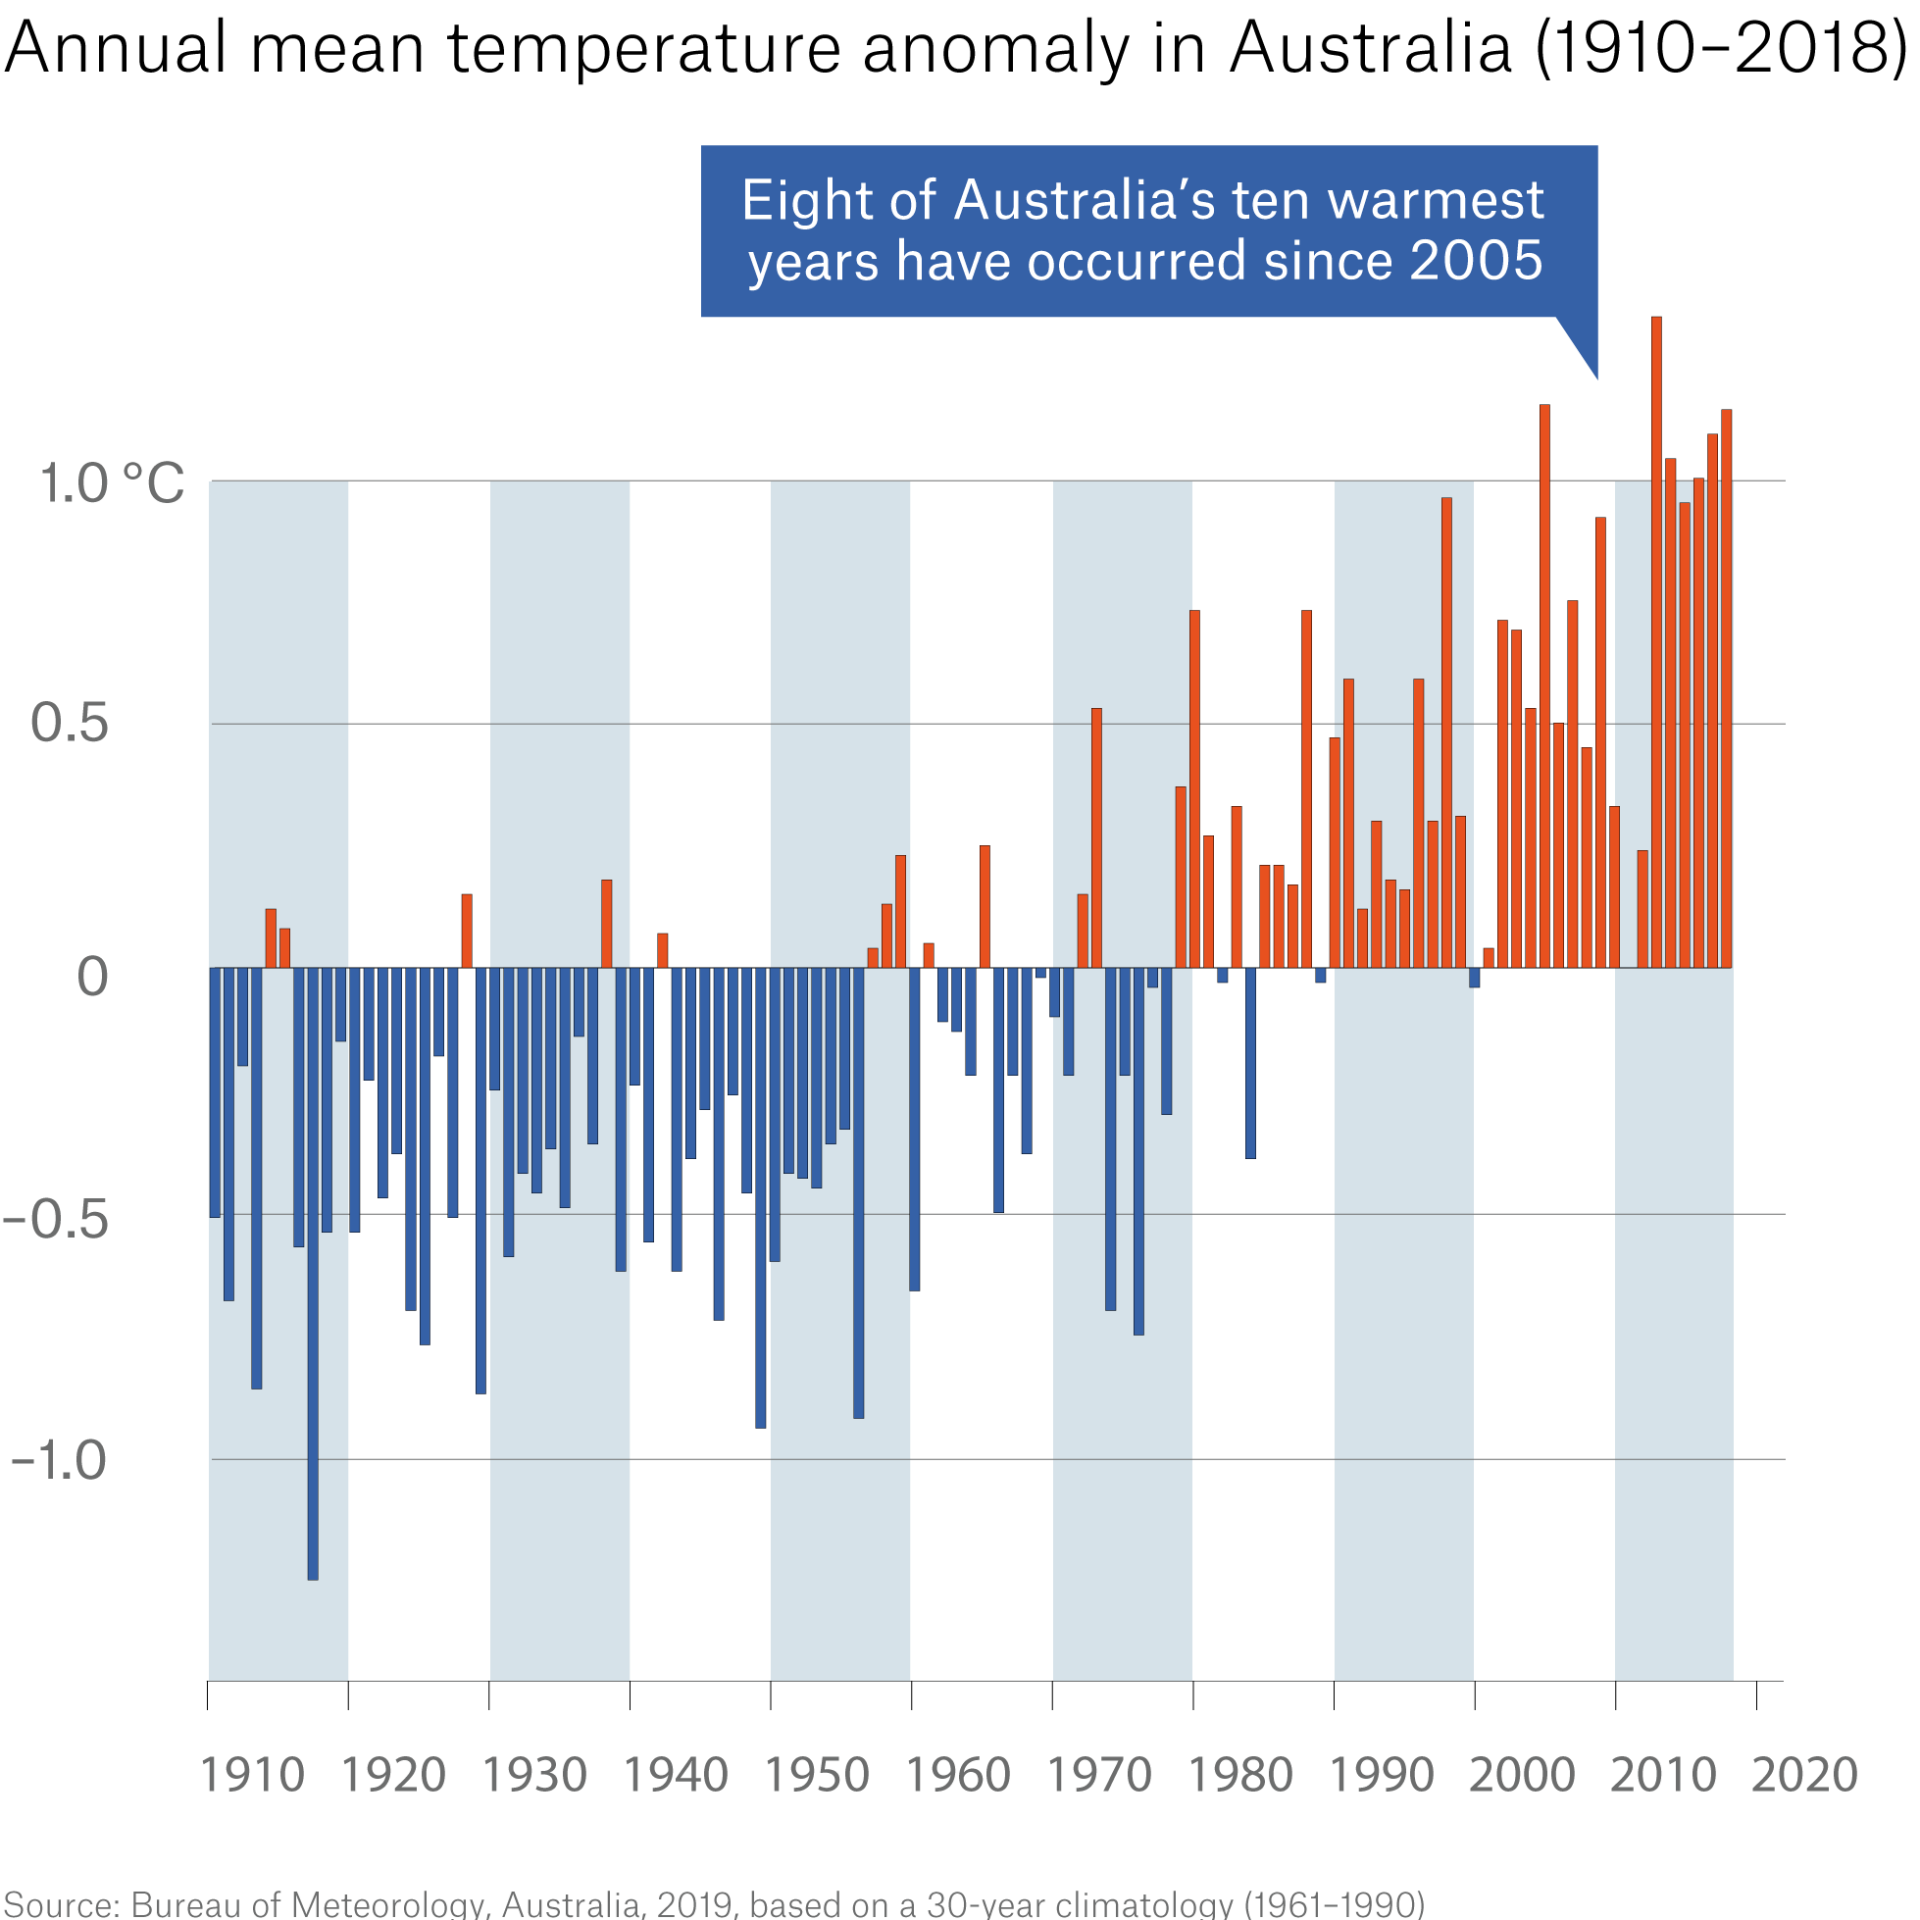 Eight of Australia's ten warmest years have occurred since 2005